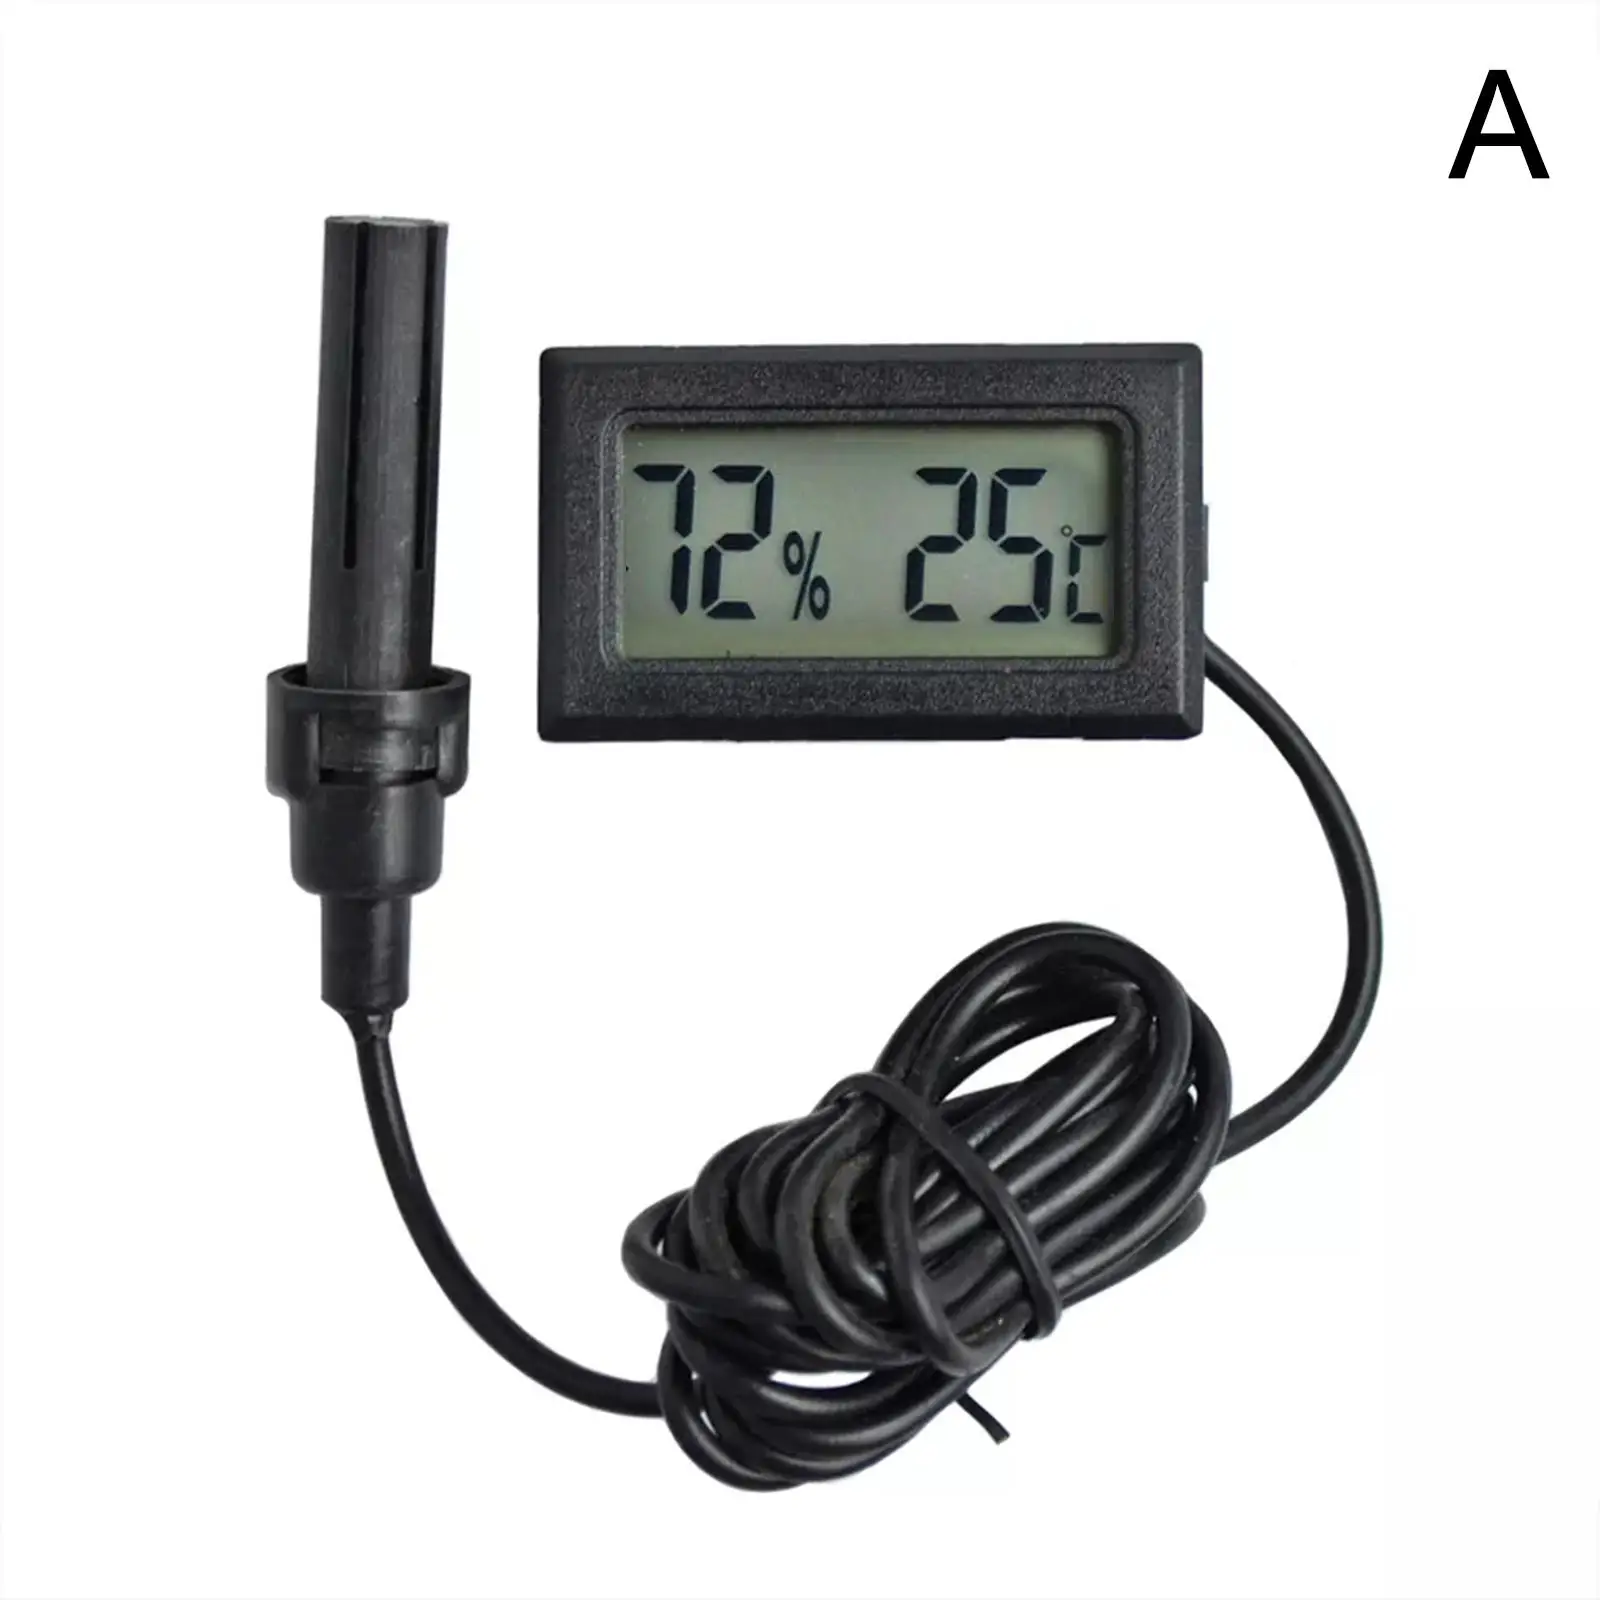 https://ae01.alicdn.com/kf/S2bc2d83a744c4bd1986b2a25221d39d9y/Mini-LCD-Thermo-Hygrometer-Indoor-Digital-Temperature-Thermostat-Sensor-Humidity-Meter-Mini-Thermomether-Digital-Termometer.jpg